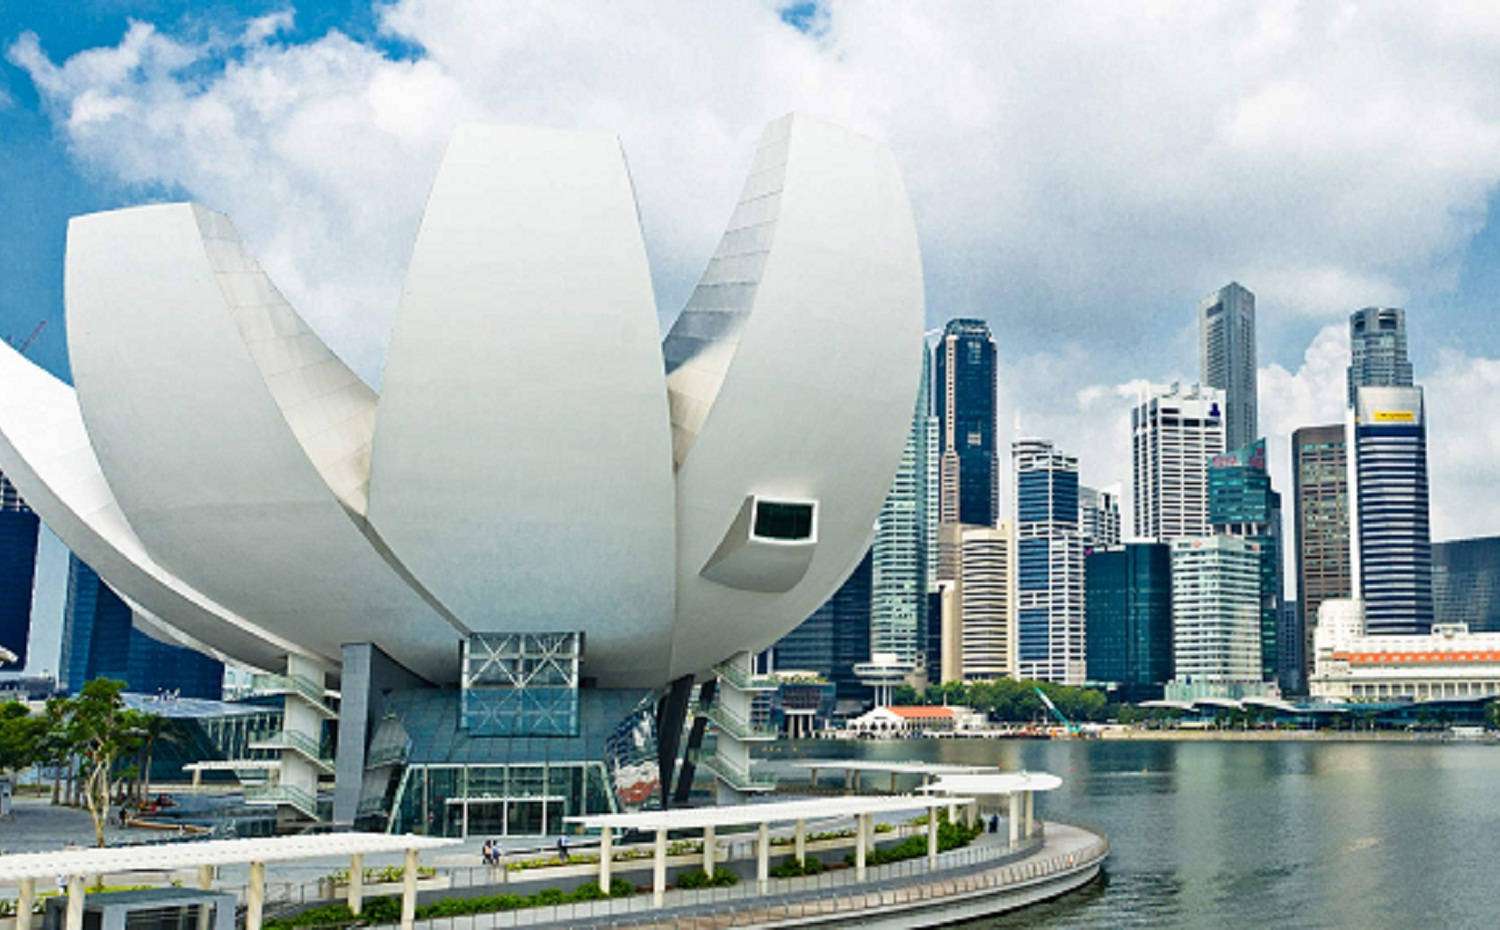 15% off ArtScience Museum ticket with your stay in Marina Bay Sands